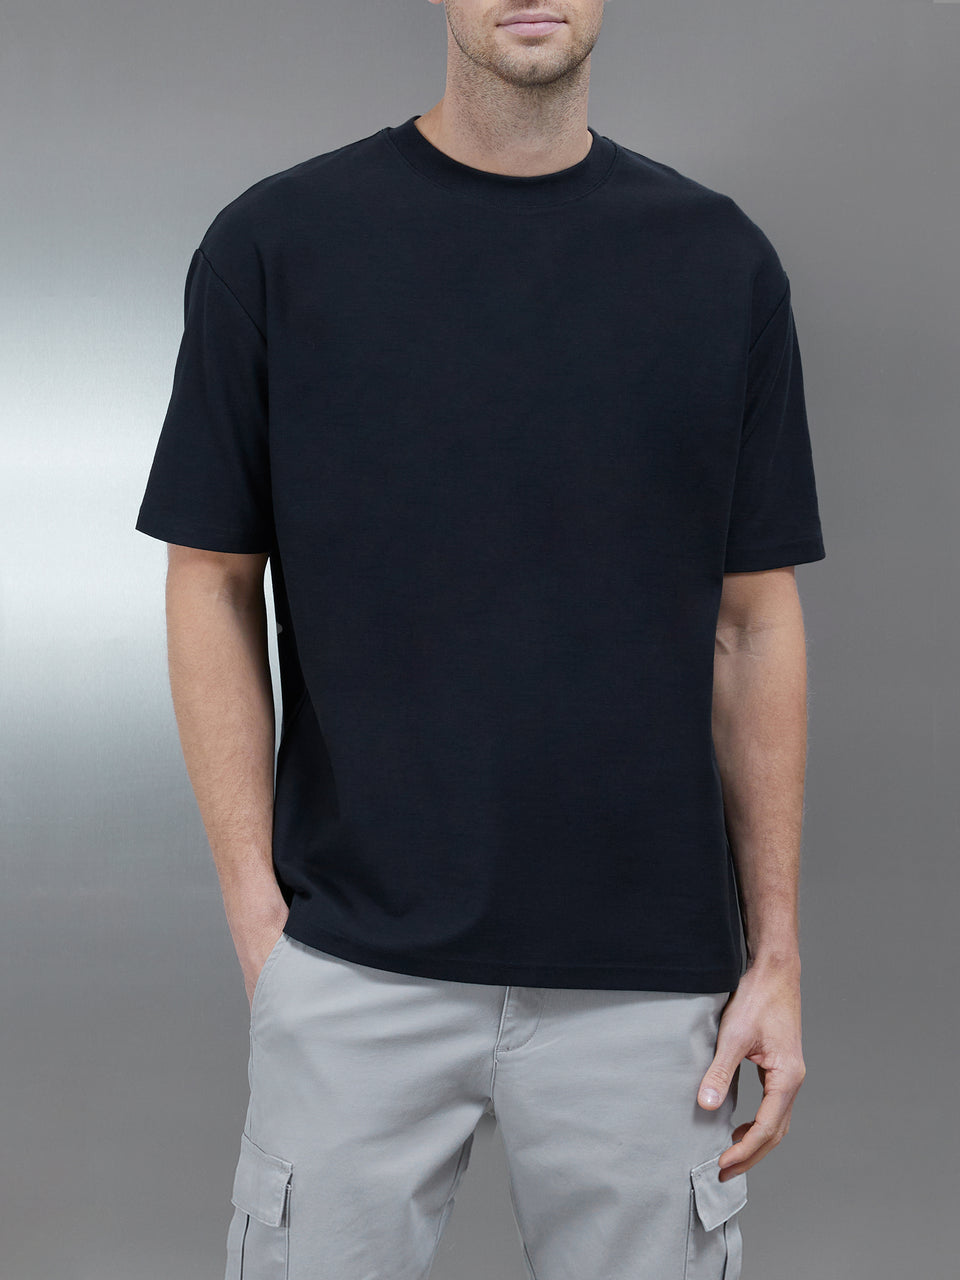 Relaxed Fit T-Shirt in Midnight Navy